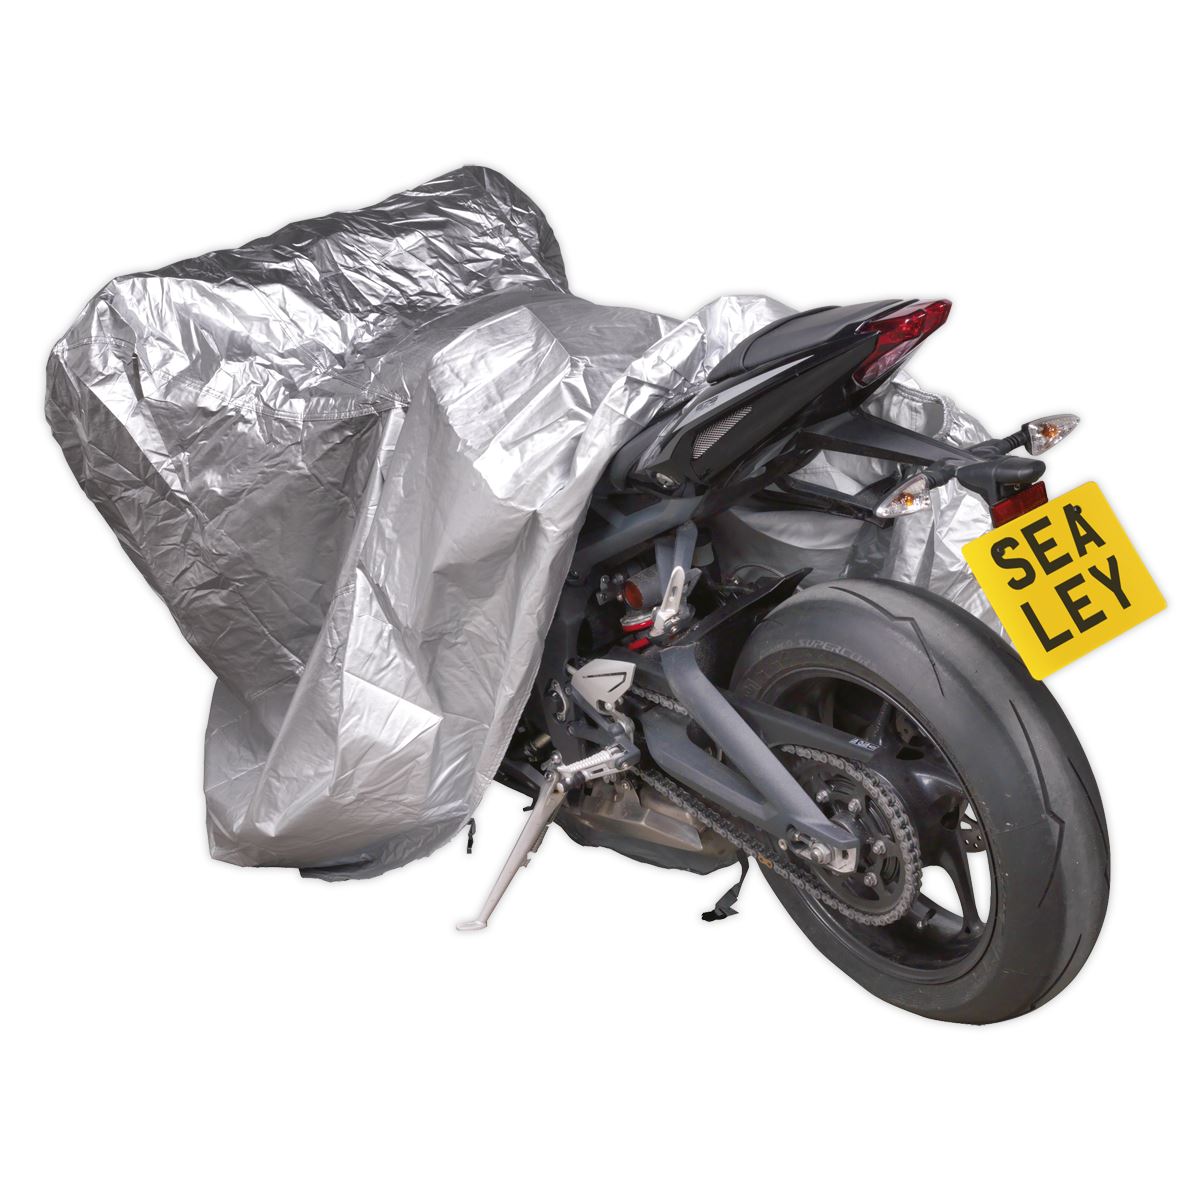 Sealey Motorcycle Cover 2460 x 1050 x 1370mm - Large